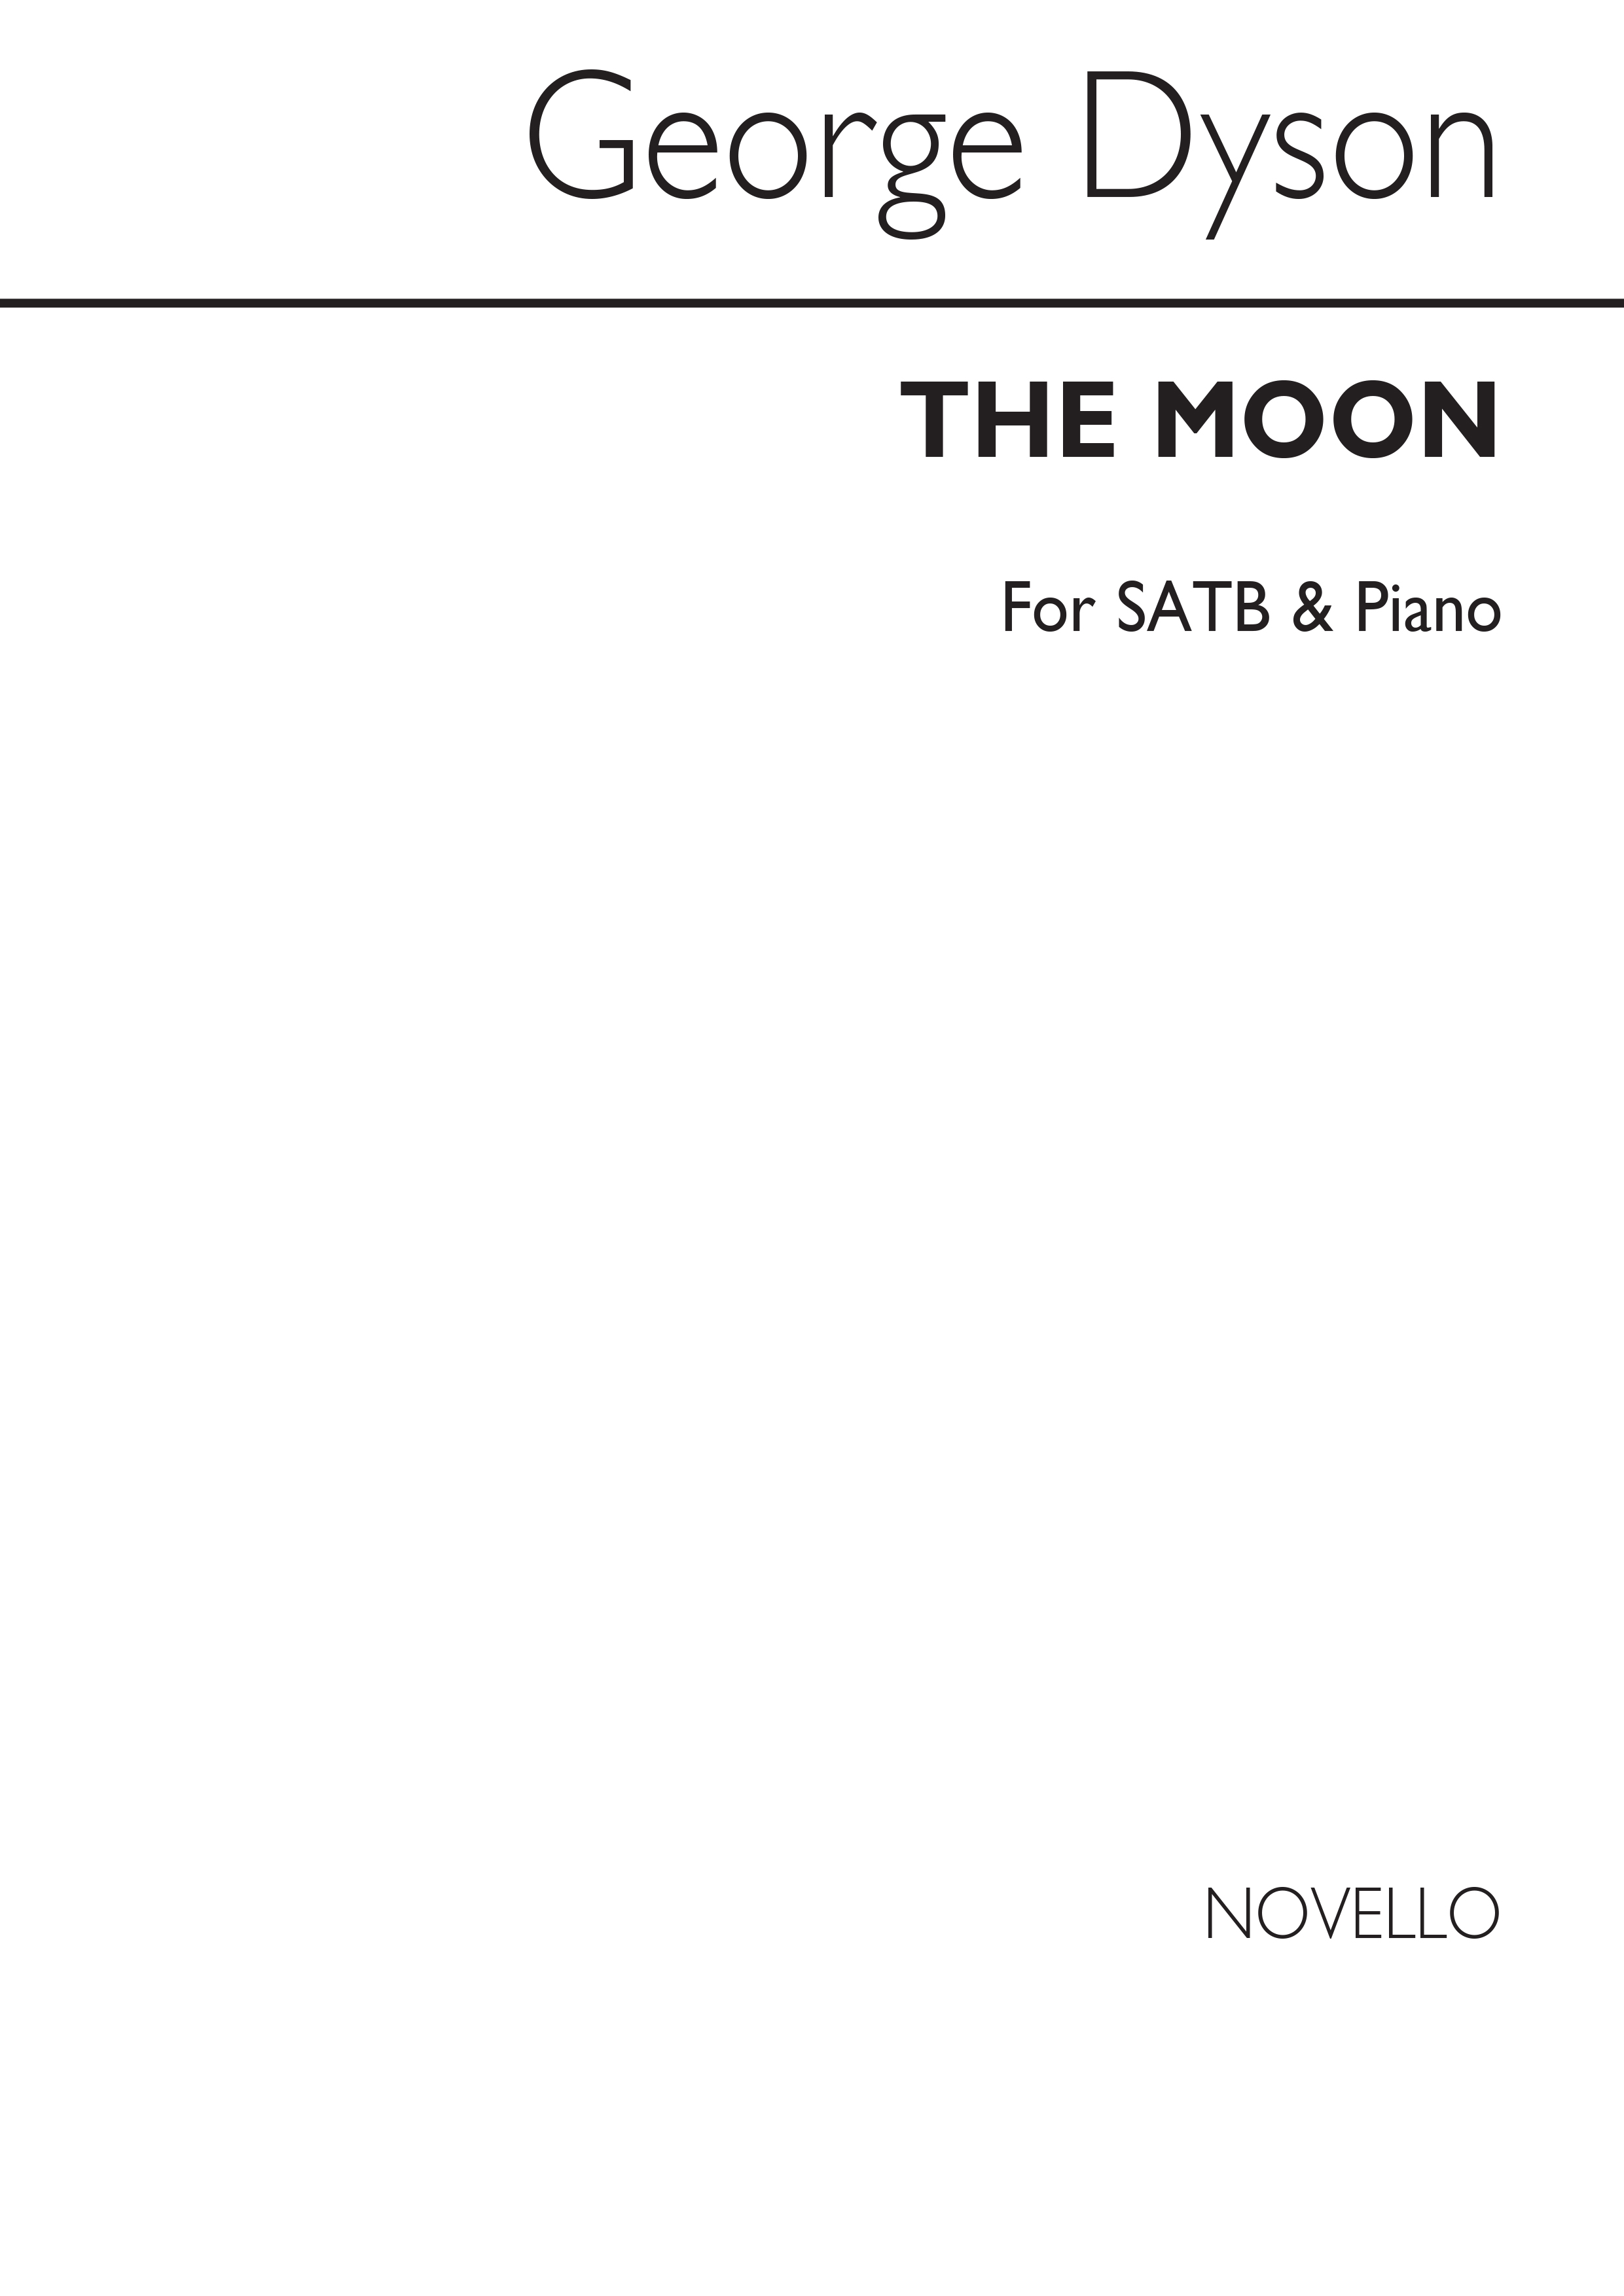 George Dyson: The Moon for SATB and Piano